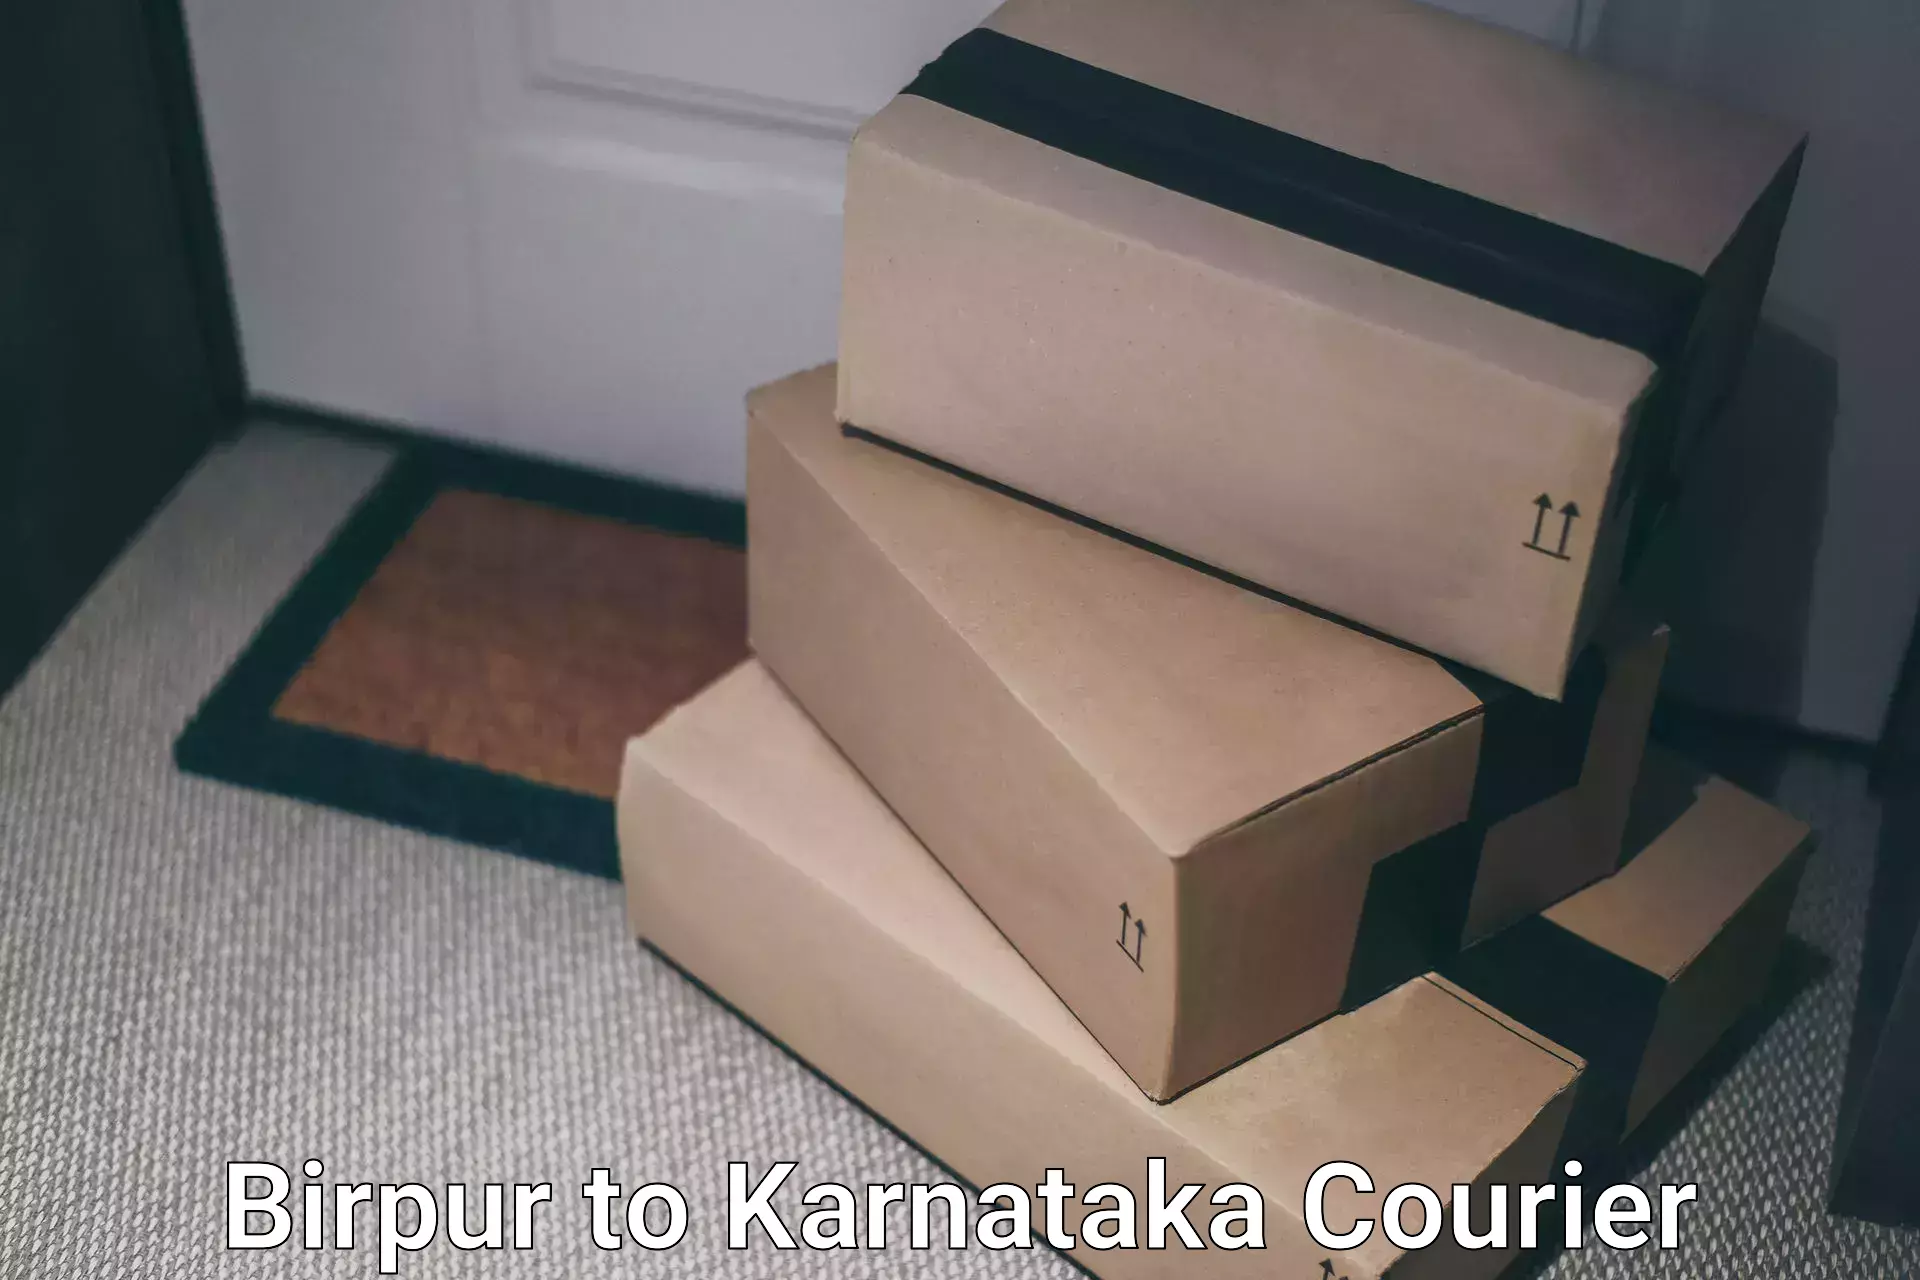 Affordable parcel service Birpur to Nagamangala